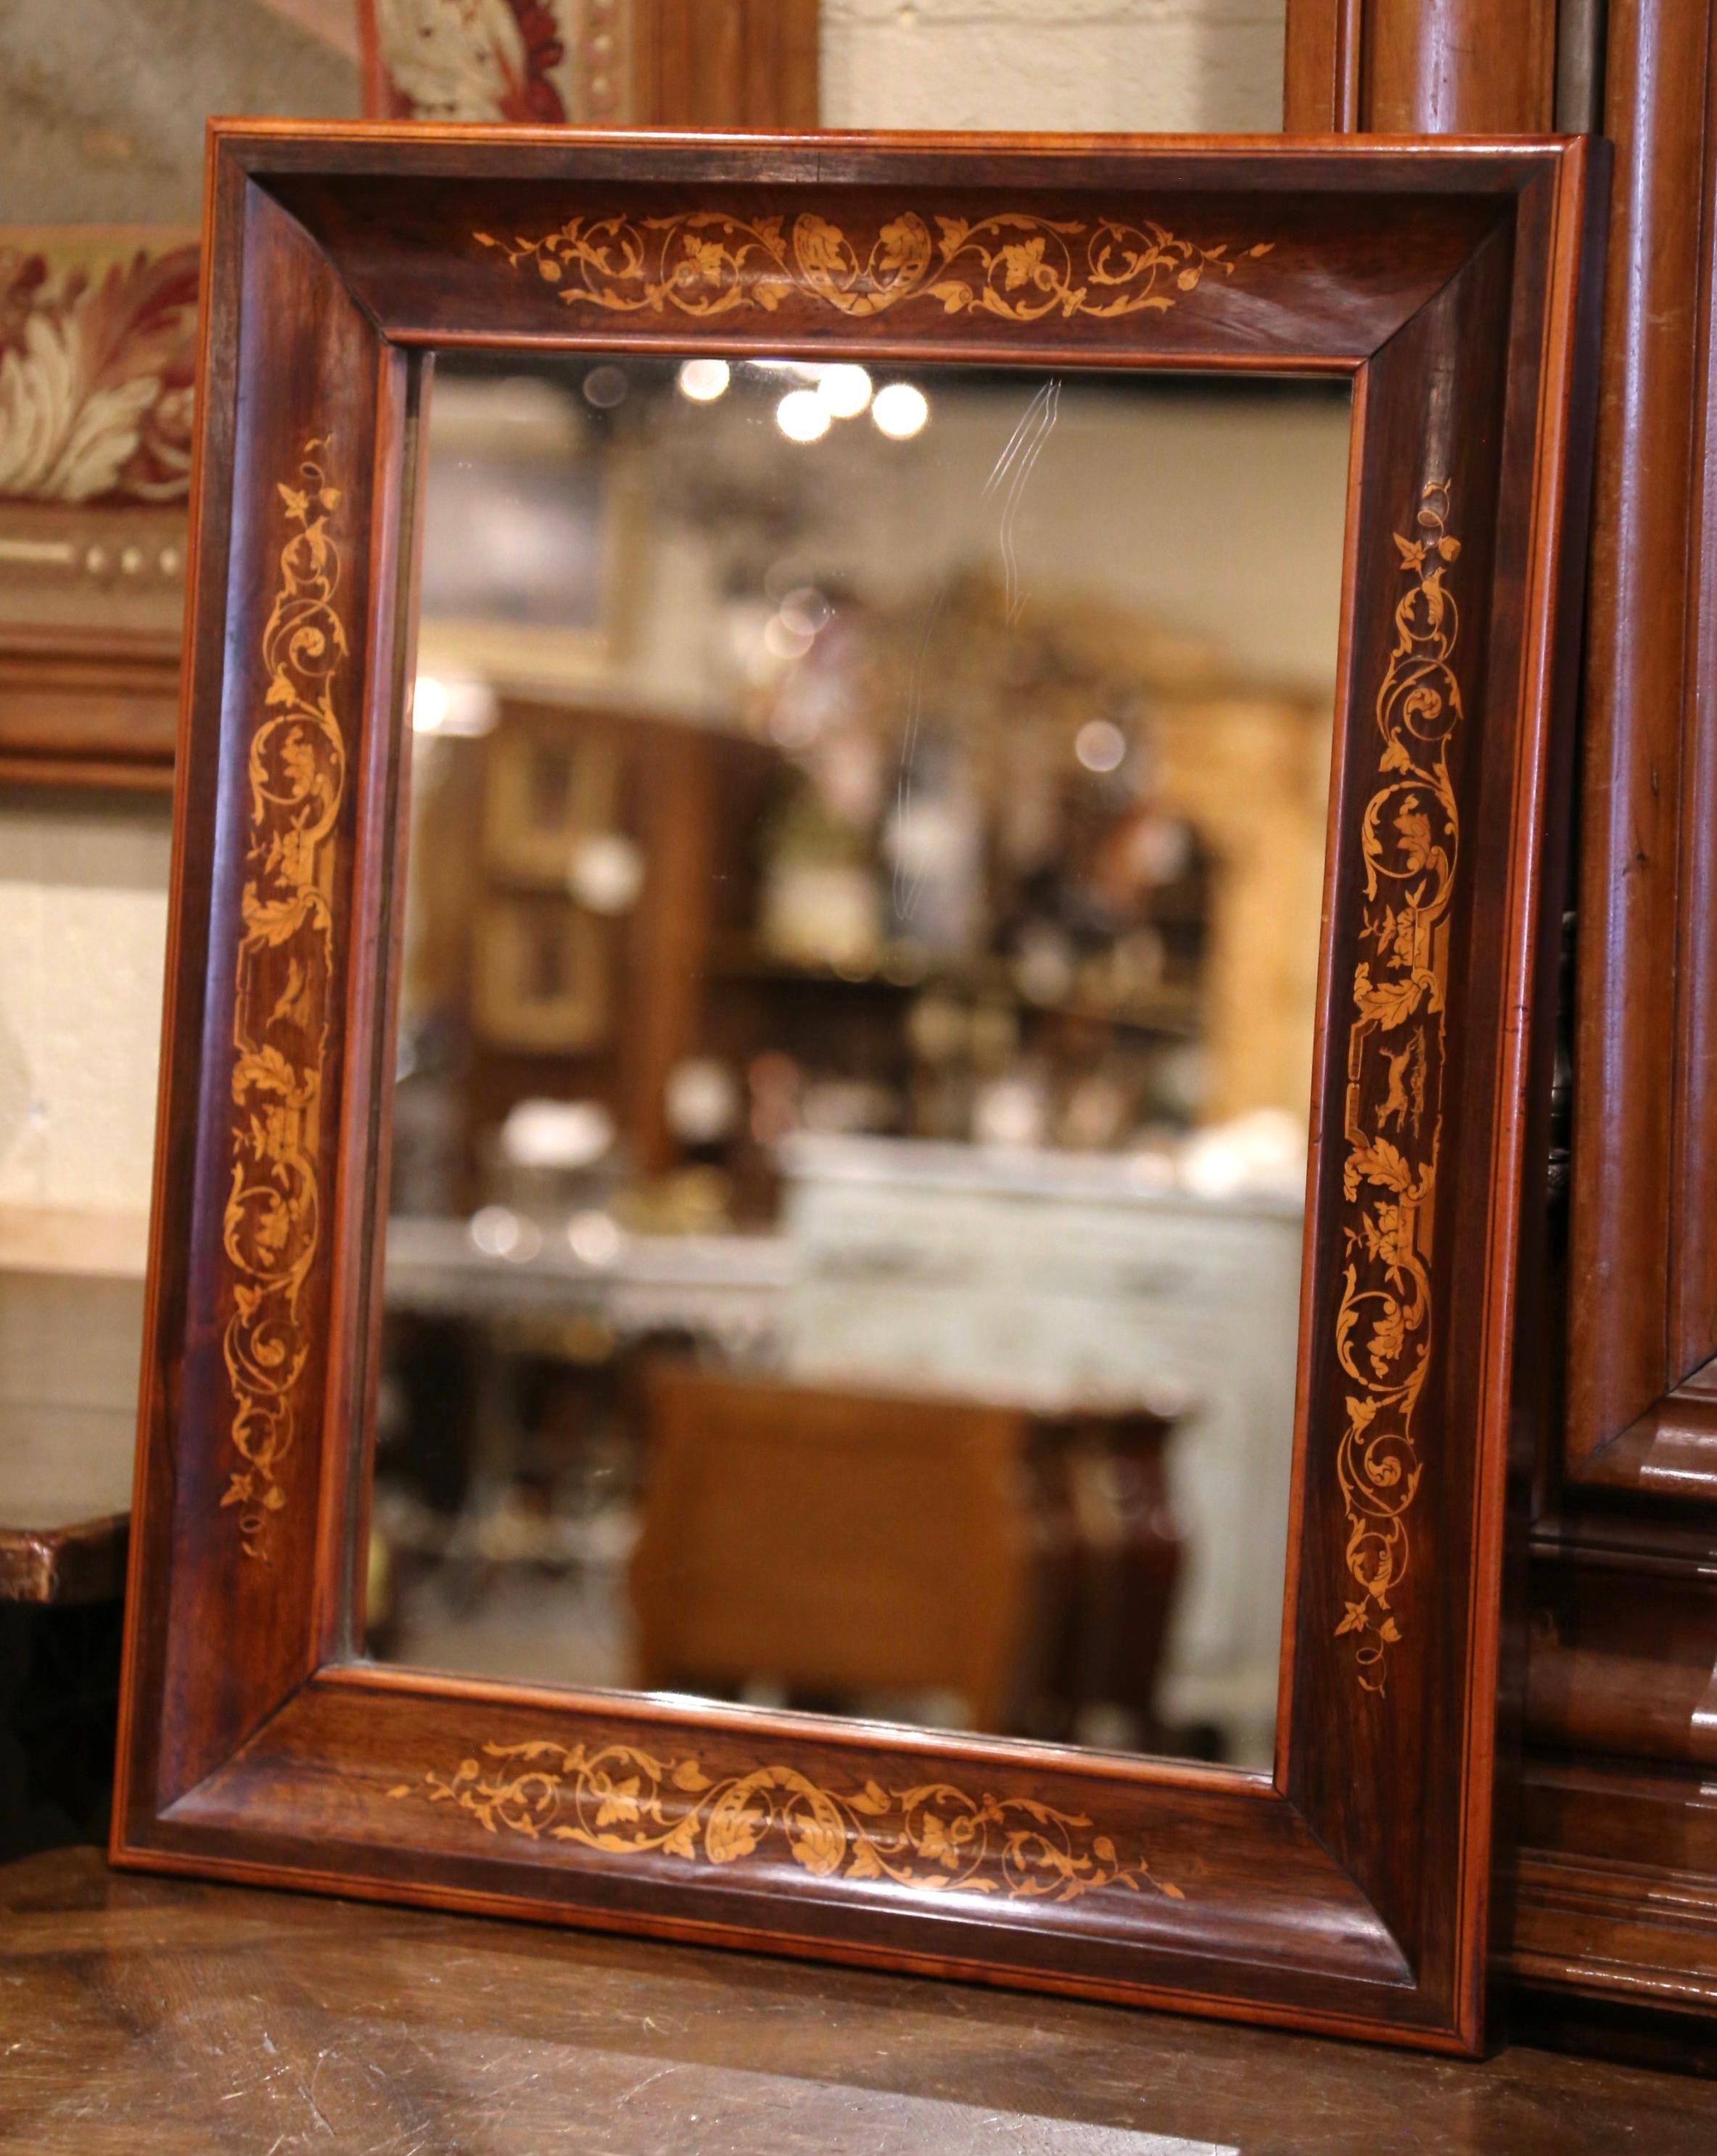 Versatile, this petite mirror could be hung horizontally or vertically in a number of rooms for a traditional Napoleon III French style. Crafted in Paris France, circa 1890, and built of walnut wood, the antique mirror has traditional, timeless